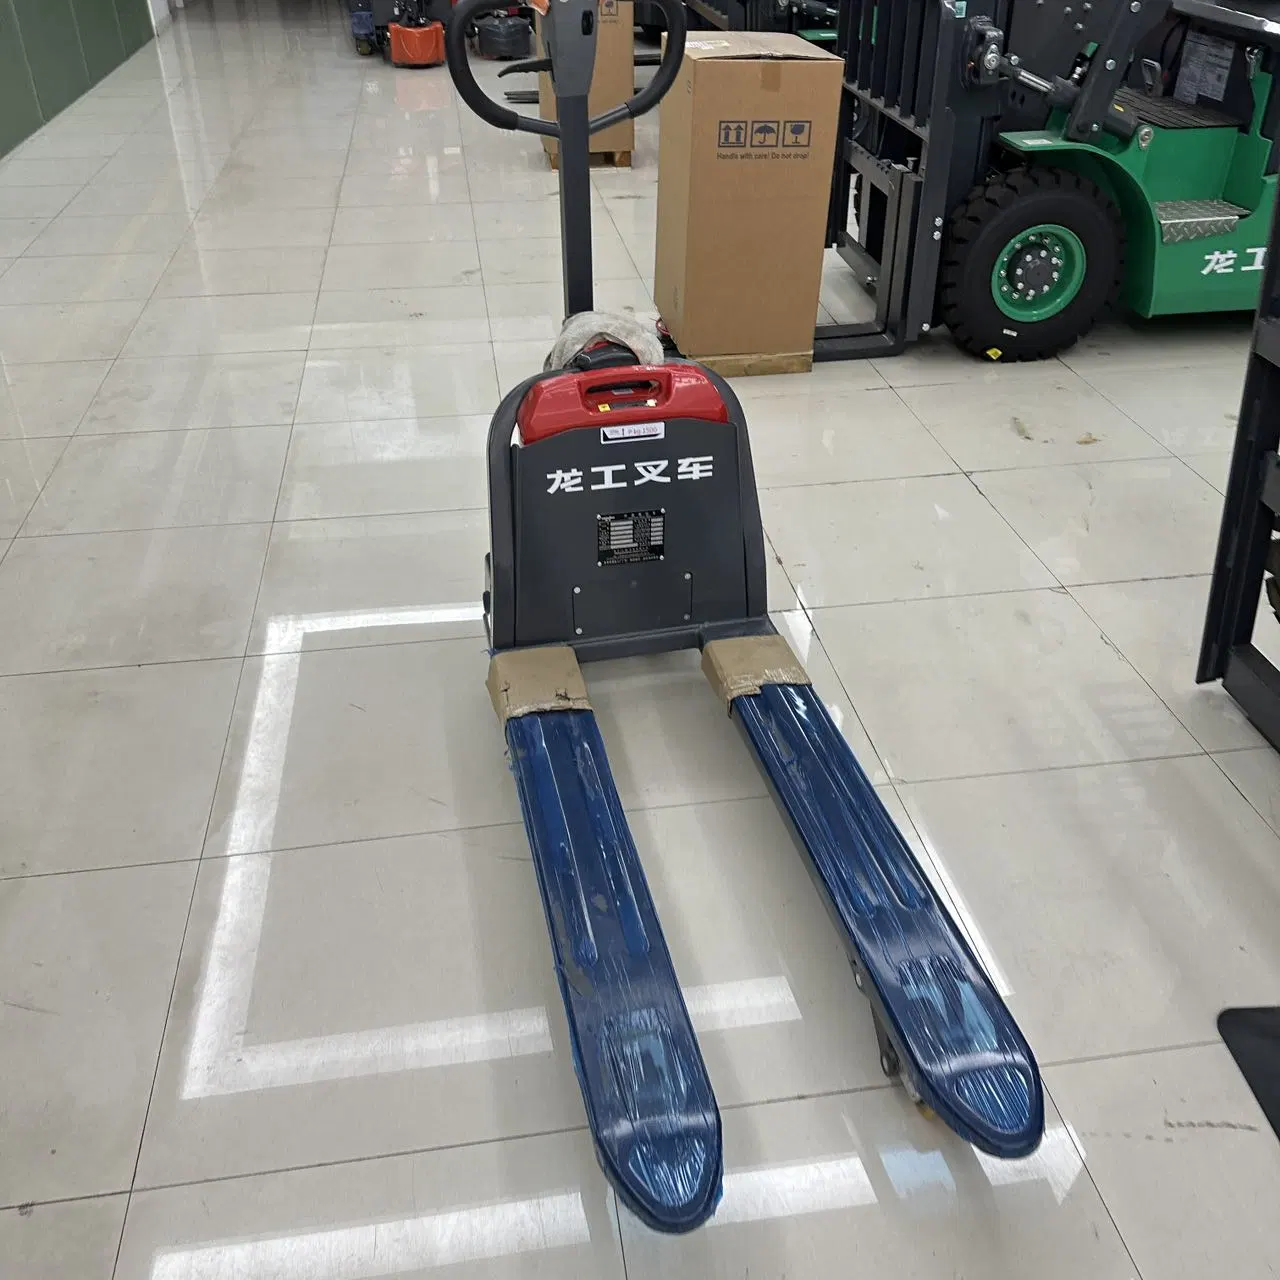 Full Electric Lithium Battery Pallet Stacker. 2.0ton Pallet Truck